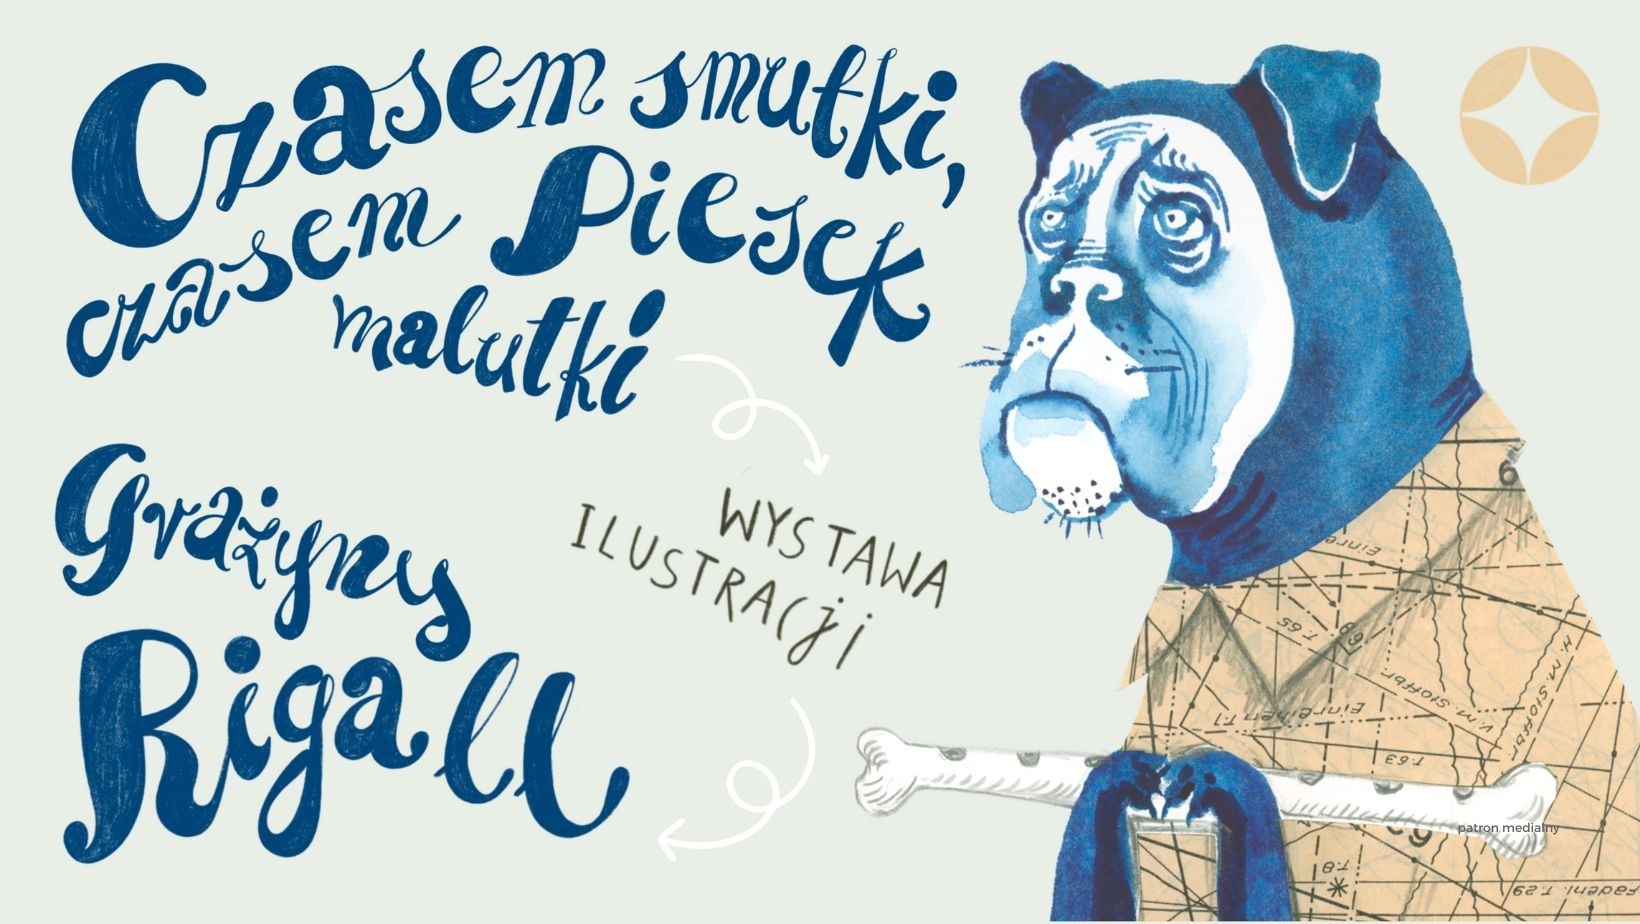 “Sometimes sadness, sometimes a tiny dog” | exhibition of illustrations by Grażyna Rigall